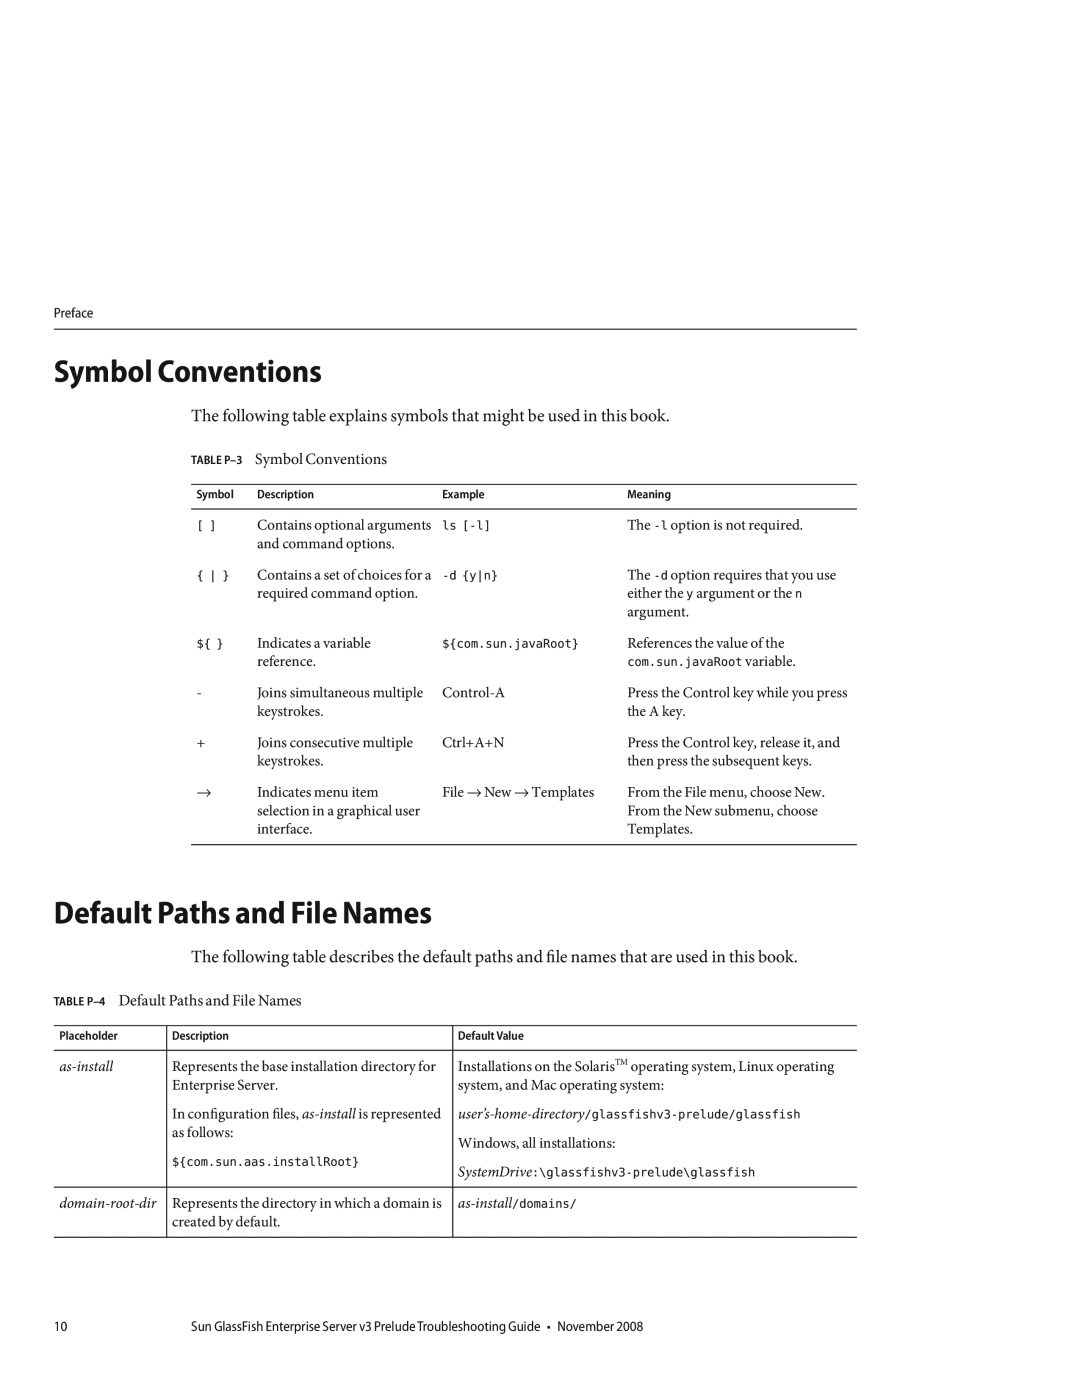 Sun Microsystems 820682310 manual Symbol Conventions, TABLE P-4 Default Paths and File Names 